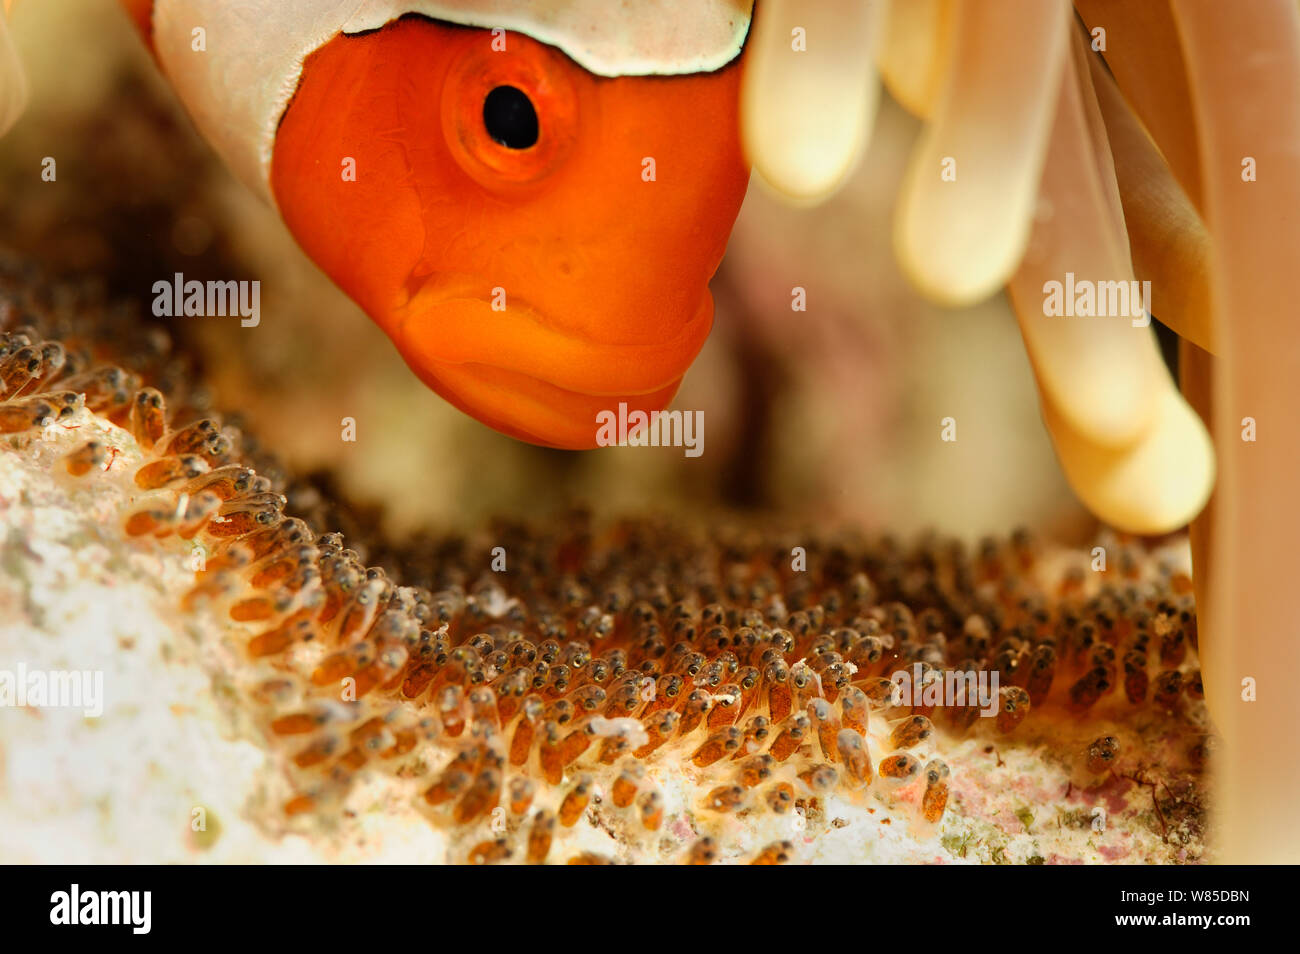 False clown anemonefish (Amphiprion ocellaris) tending its eggs at a late stage of development, North Raja Ampat, West Papua, Indonesia, Pacific Ocean. Stock Photo